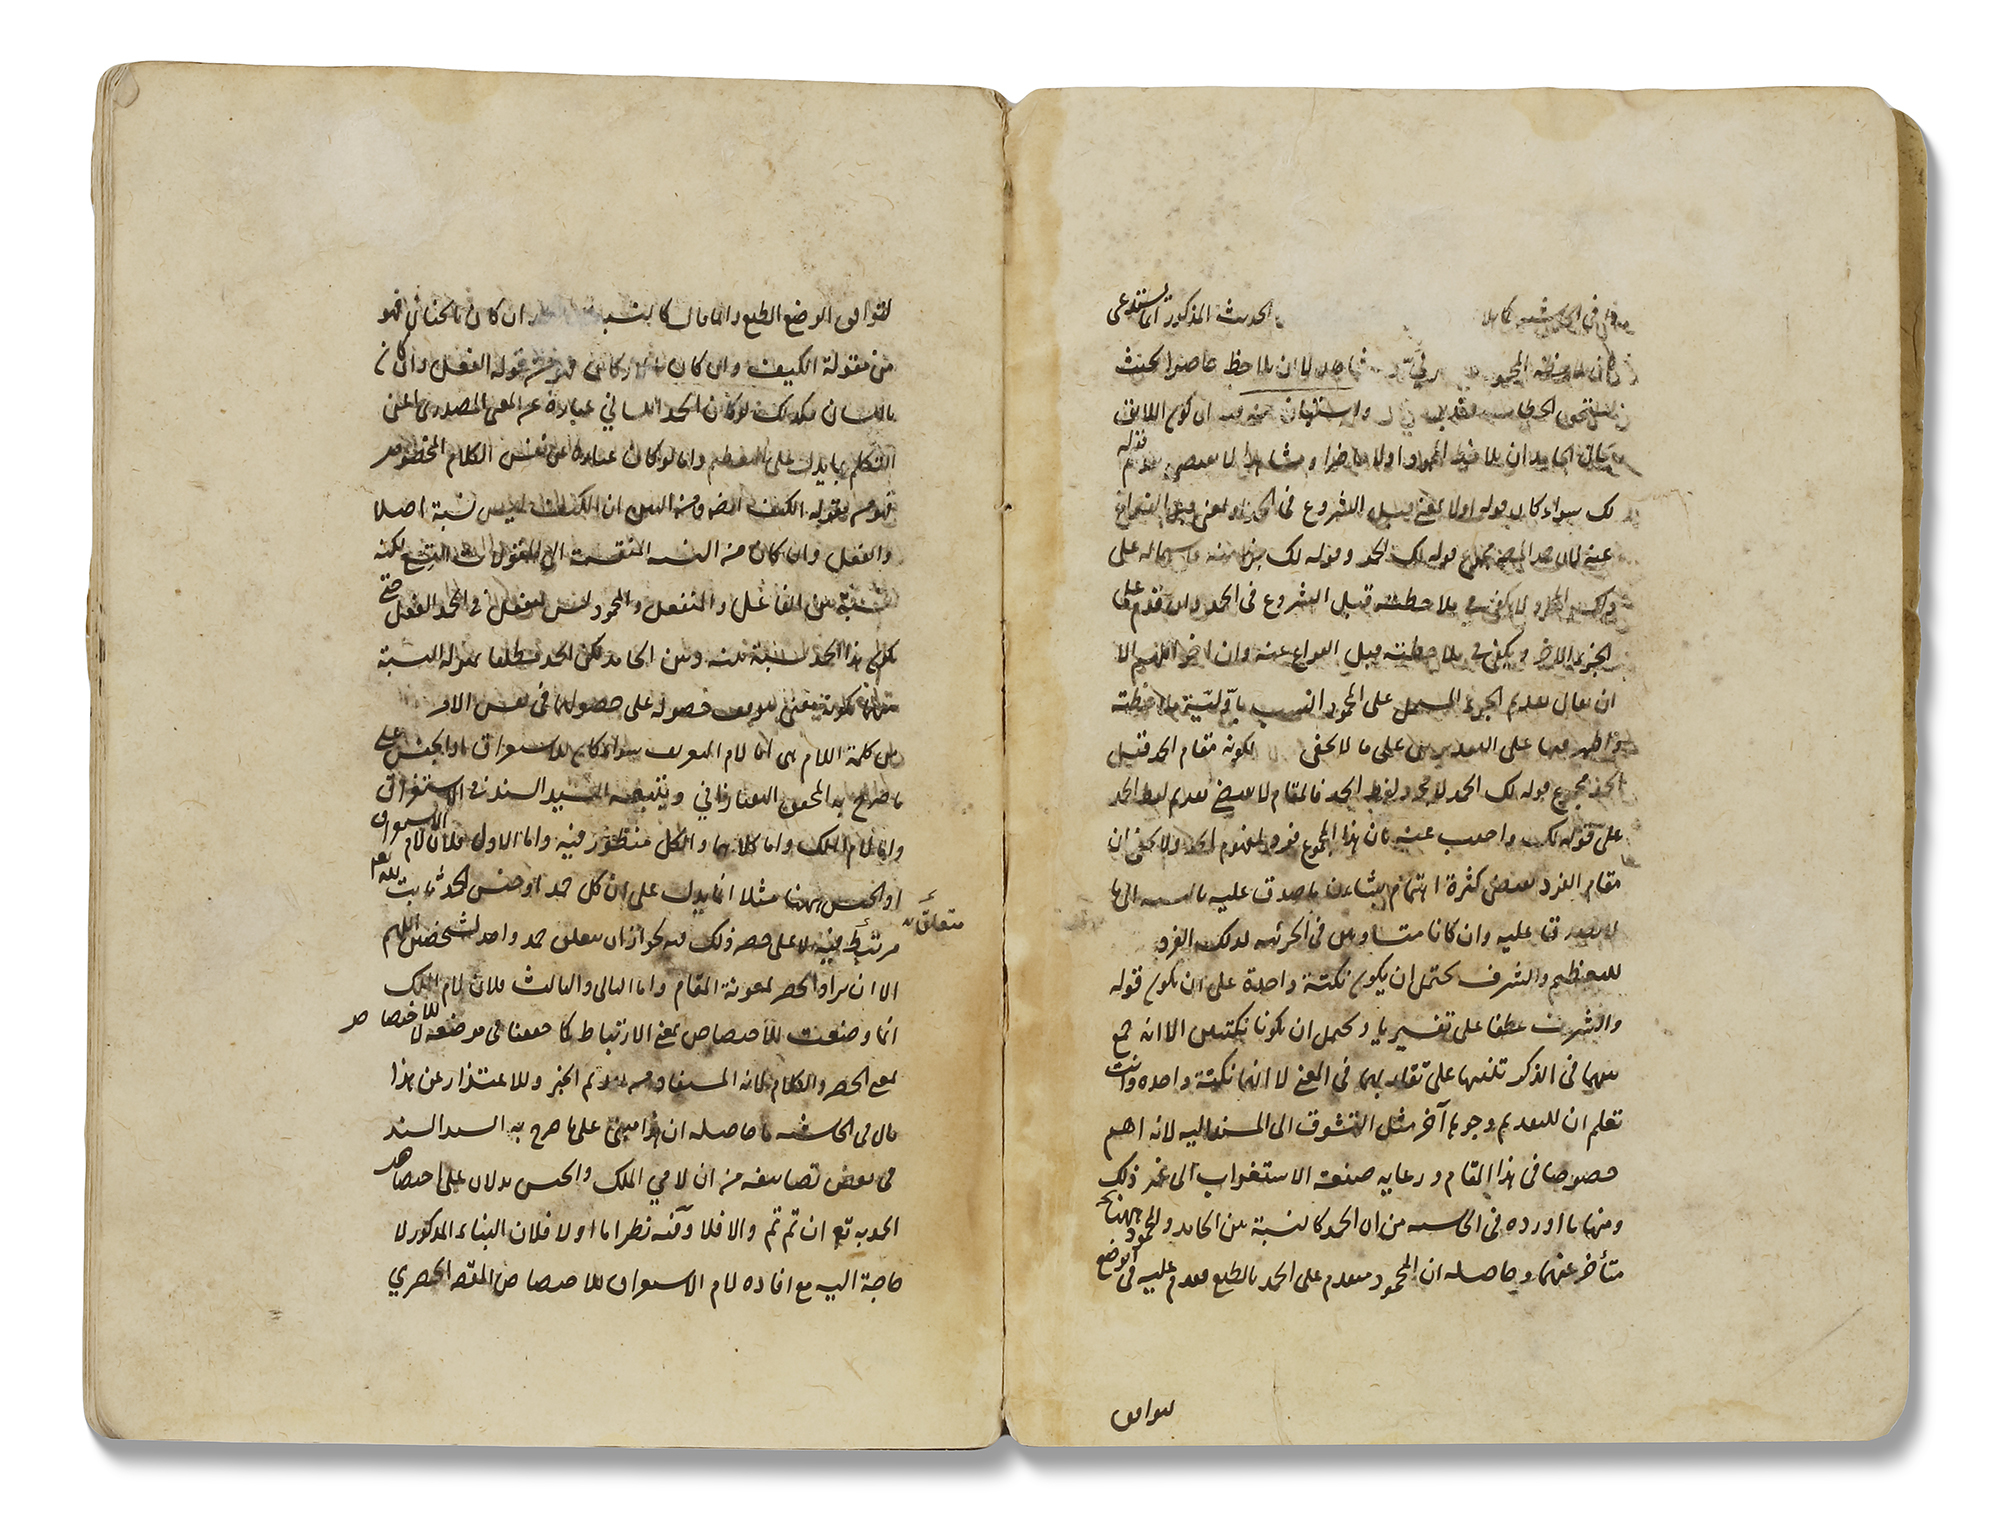 MIR ABUL FATAH IBN MIRZA MAKHDOOM AL-HUSAINI (D.974AH/ 1566AD), A TREATISE ON MATTERS CONCERNING THE - Image 2 of 8